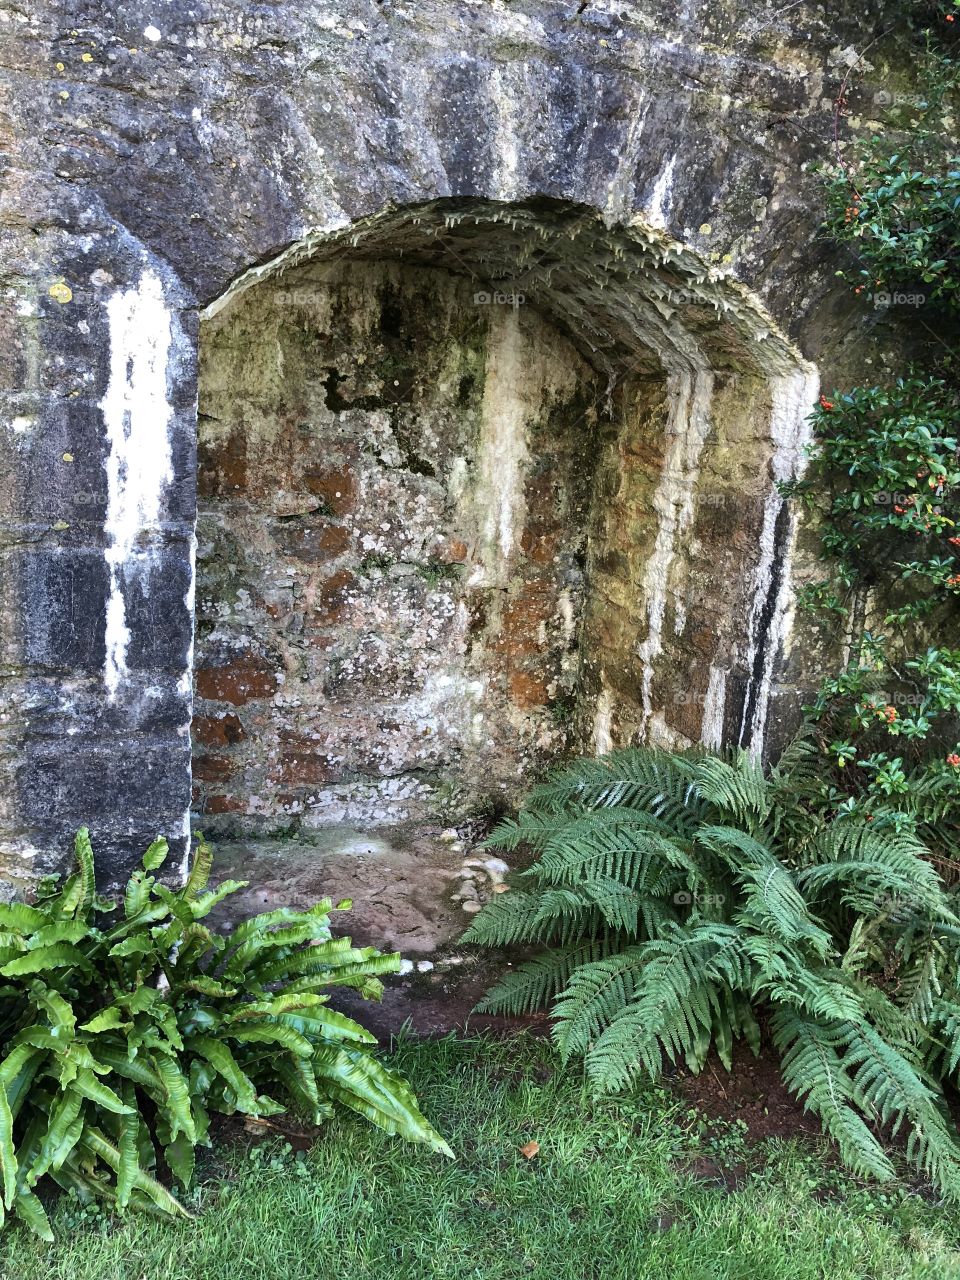 I am in awe of this lovely little fortress alcove found at a Devon country house and all wrapped up in nature.